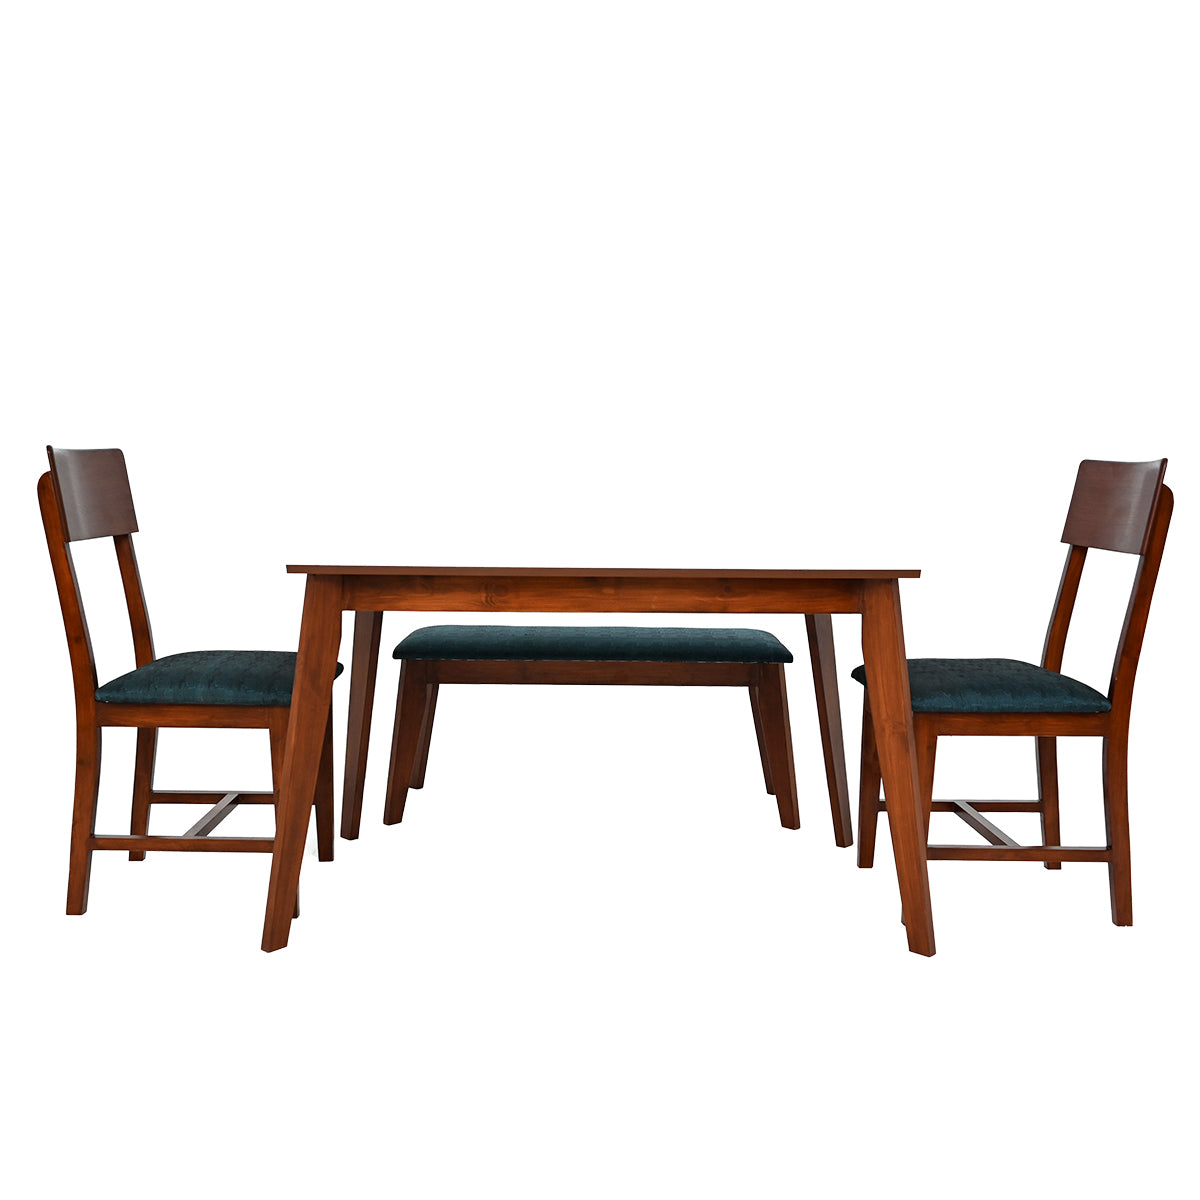 Harry 4 Person Dining Table